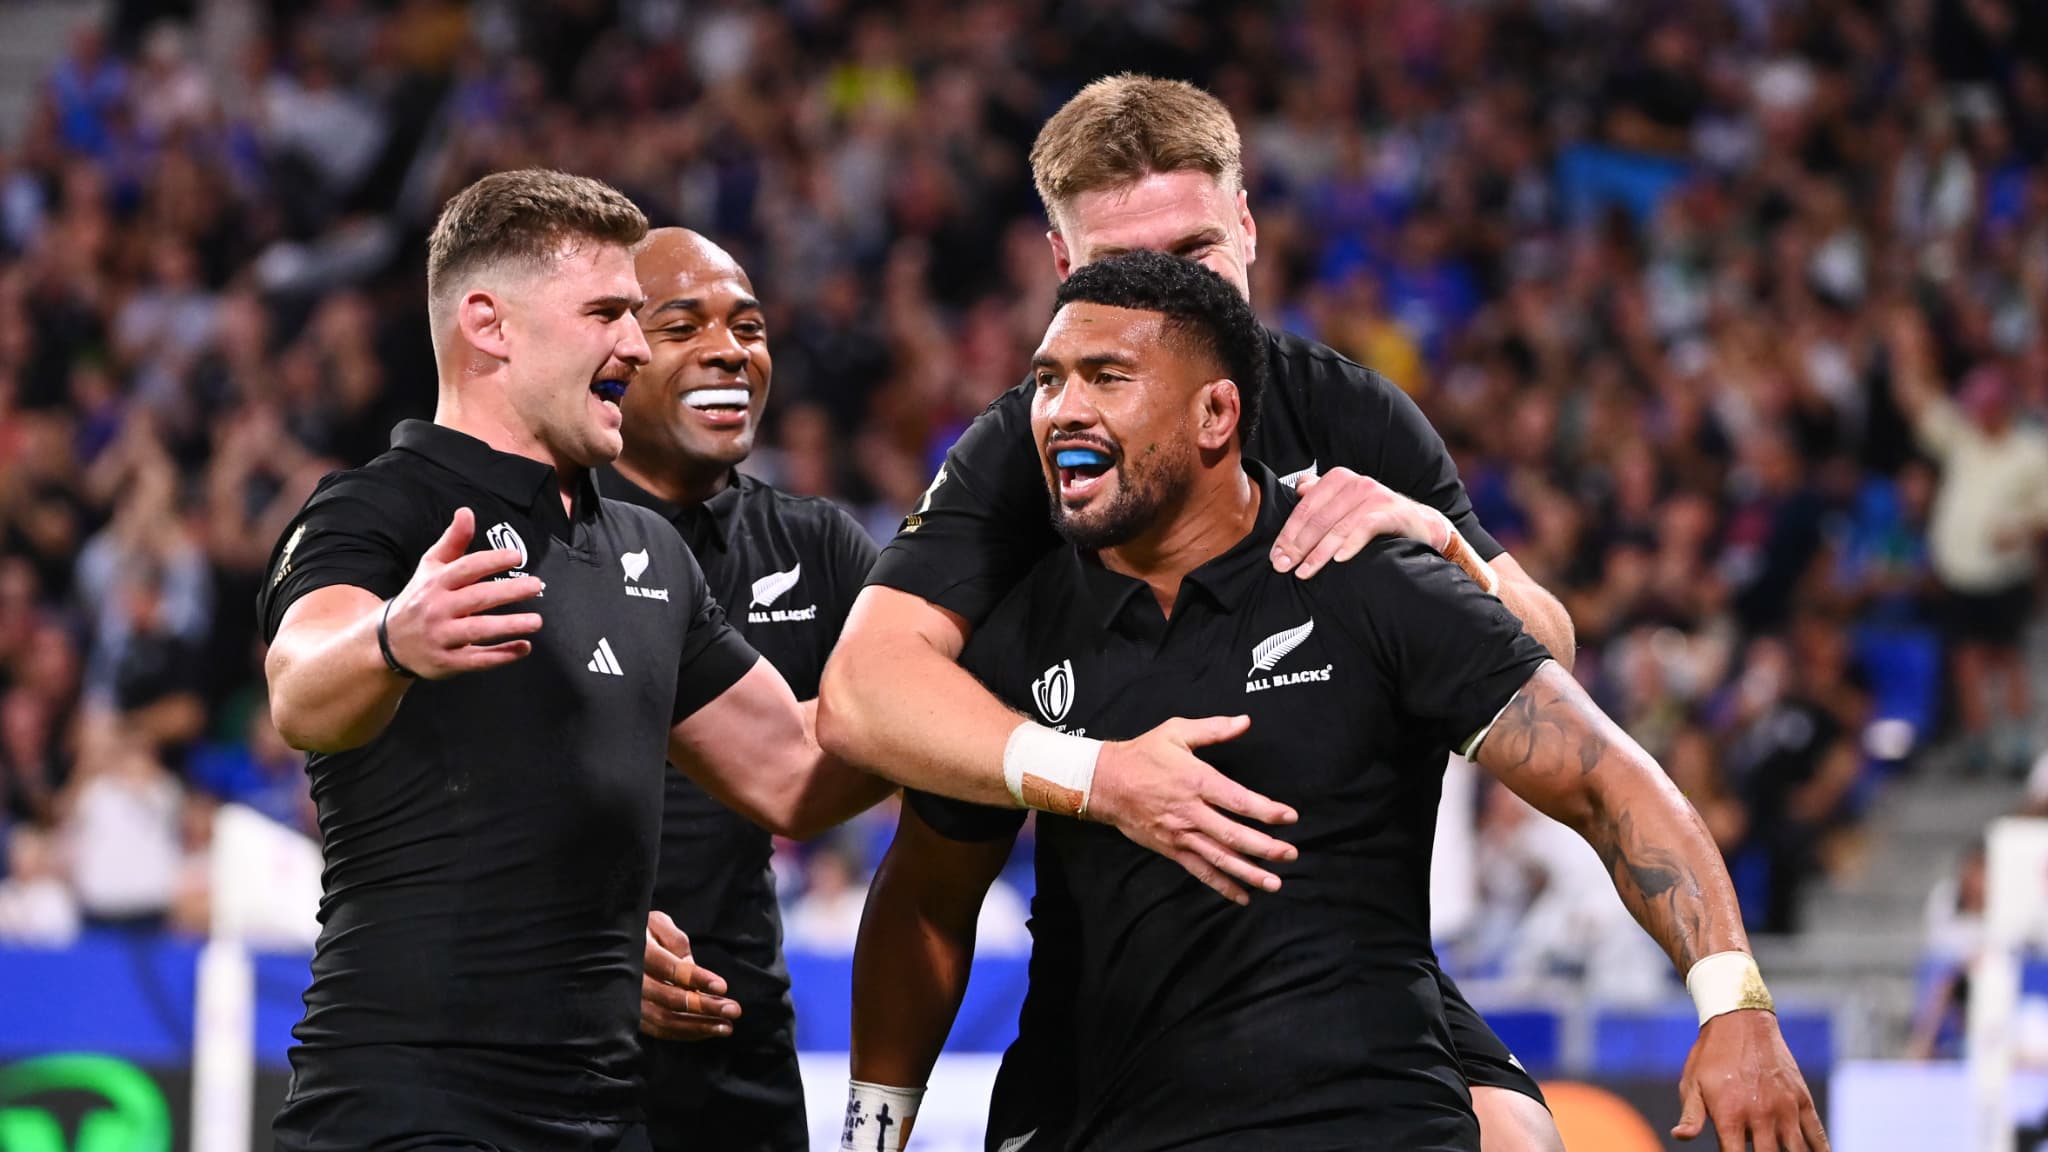 New Zealand crushes Italy, and will wait for the Blues to qualify